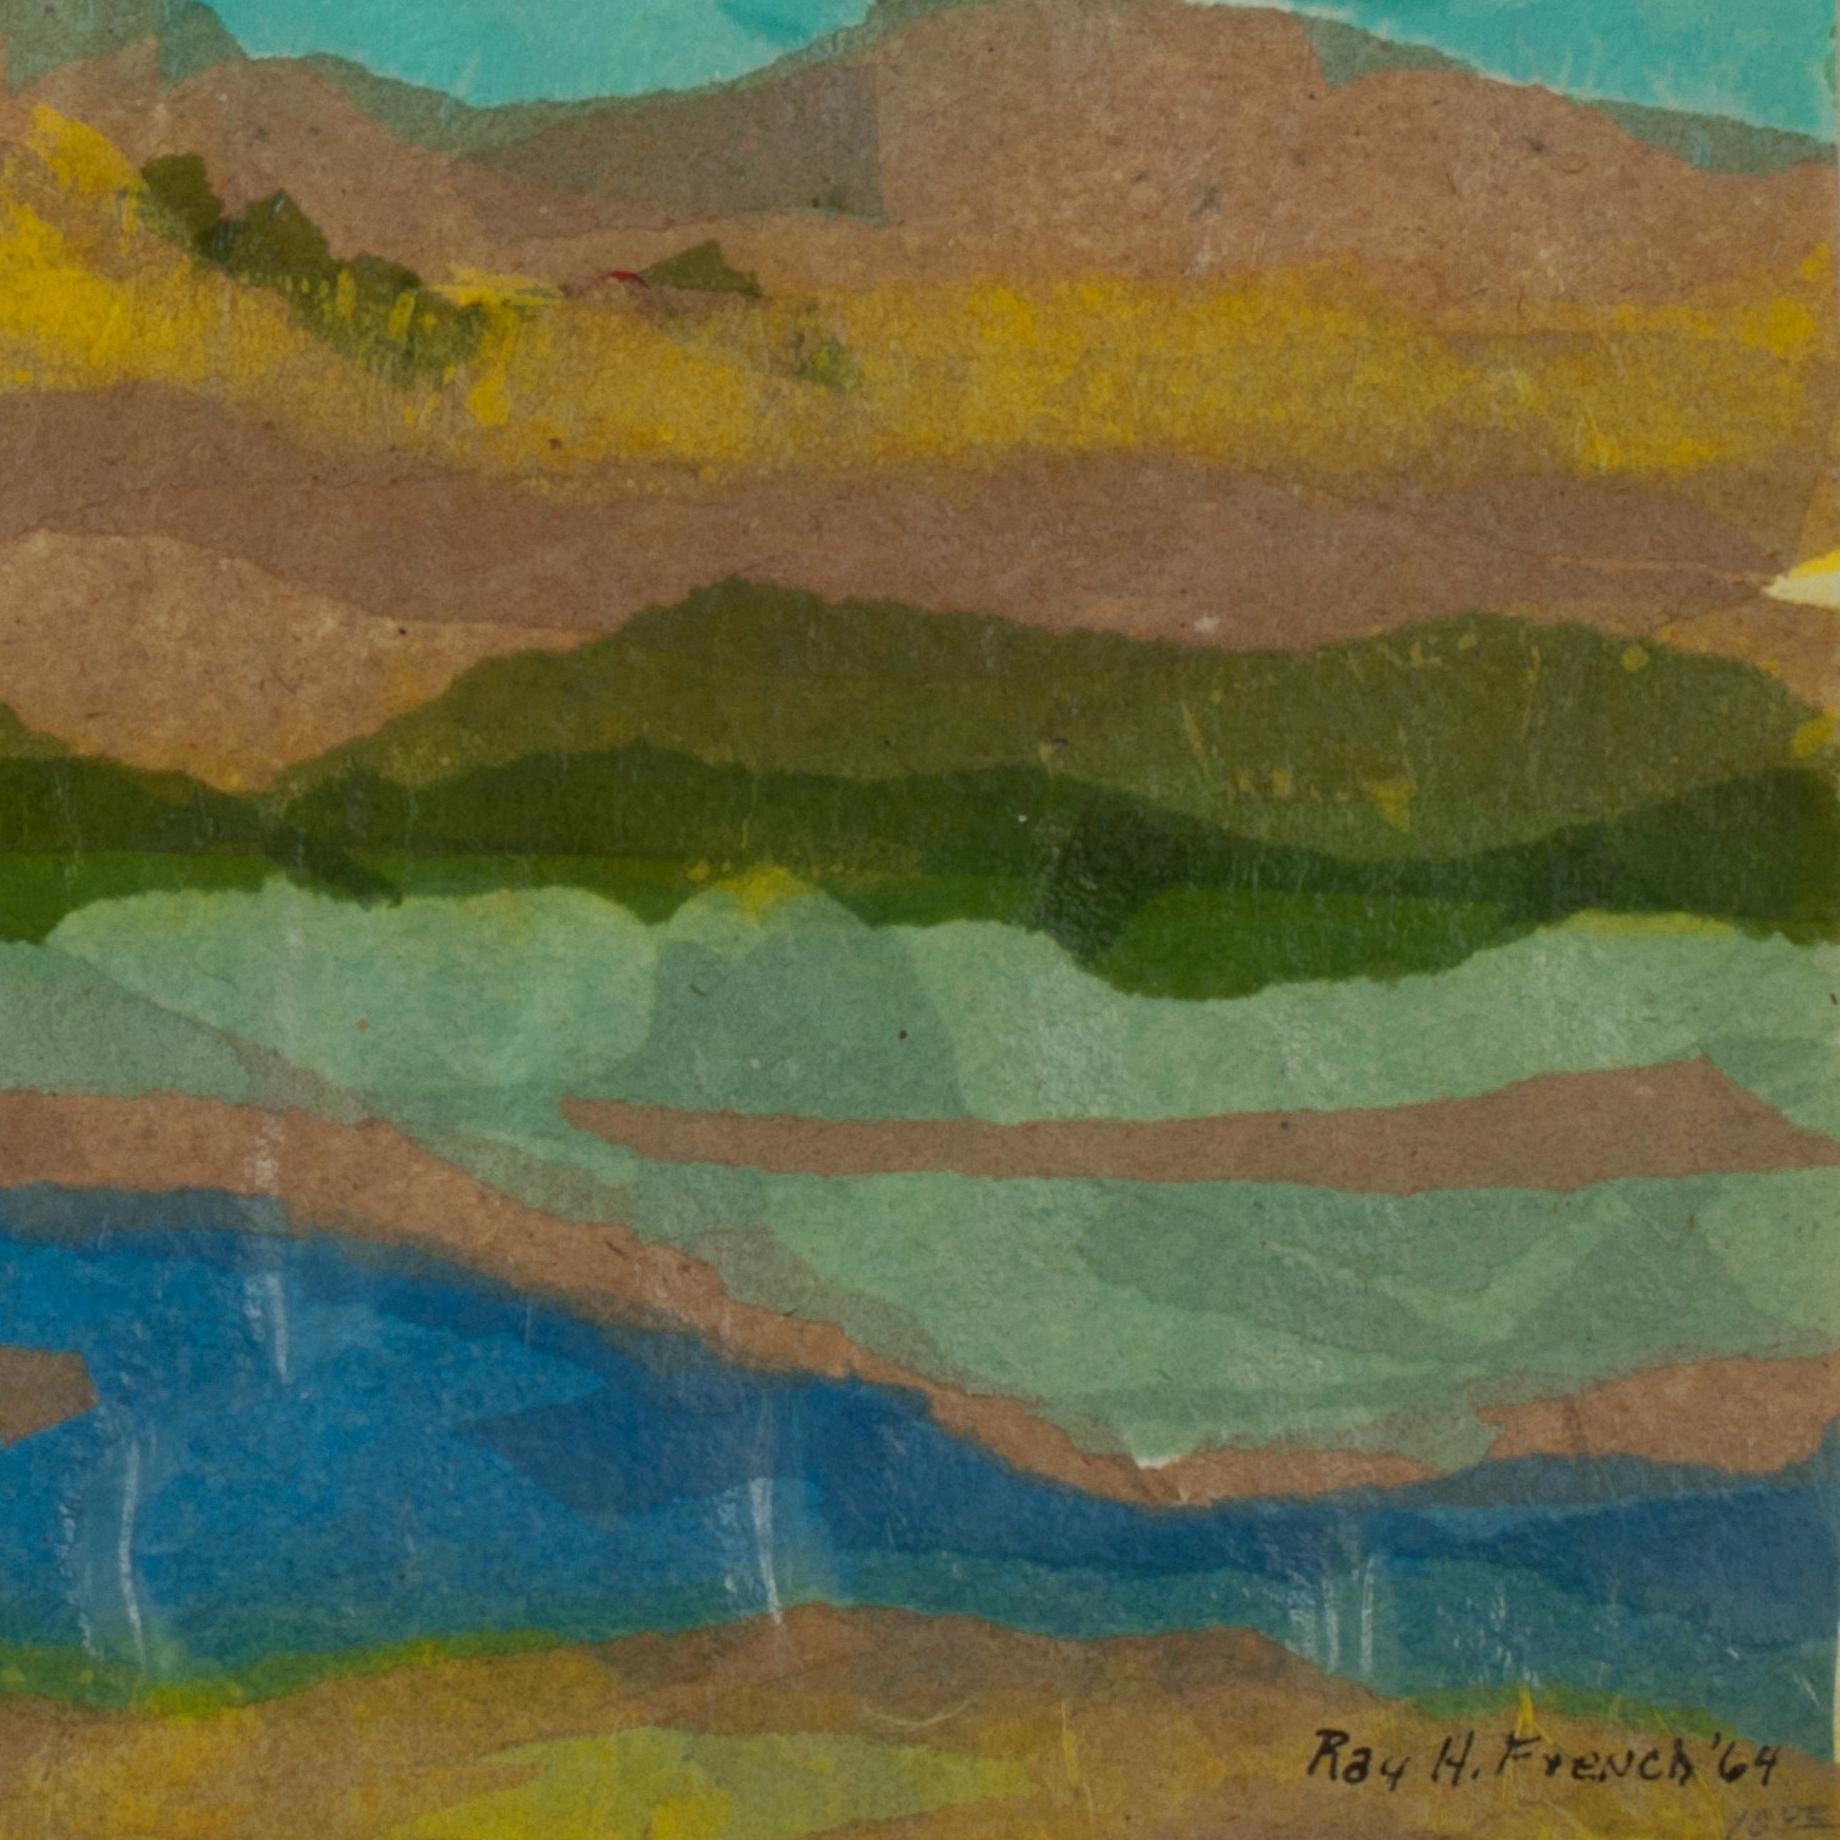 Untitled (Tuscan Landscape)
Tissue paper collage on Fabriano support
Signed and dated lower right in ink
Provenance:
Estate of the artist
Martha A. French Trust
Created while the artist lived in Florence, Italy.
Condition: Excellent
Image/Sheet